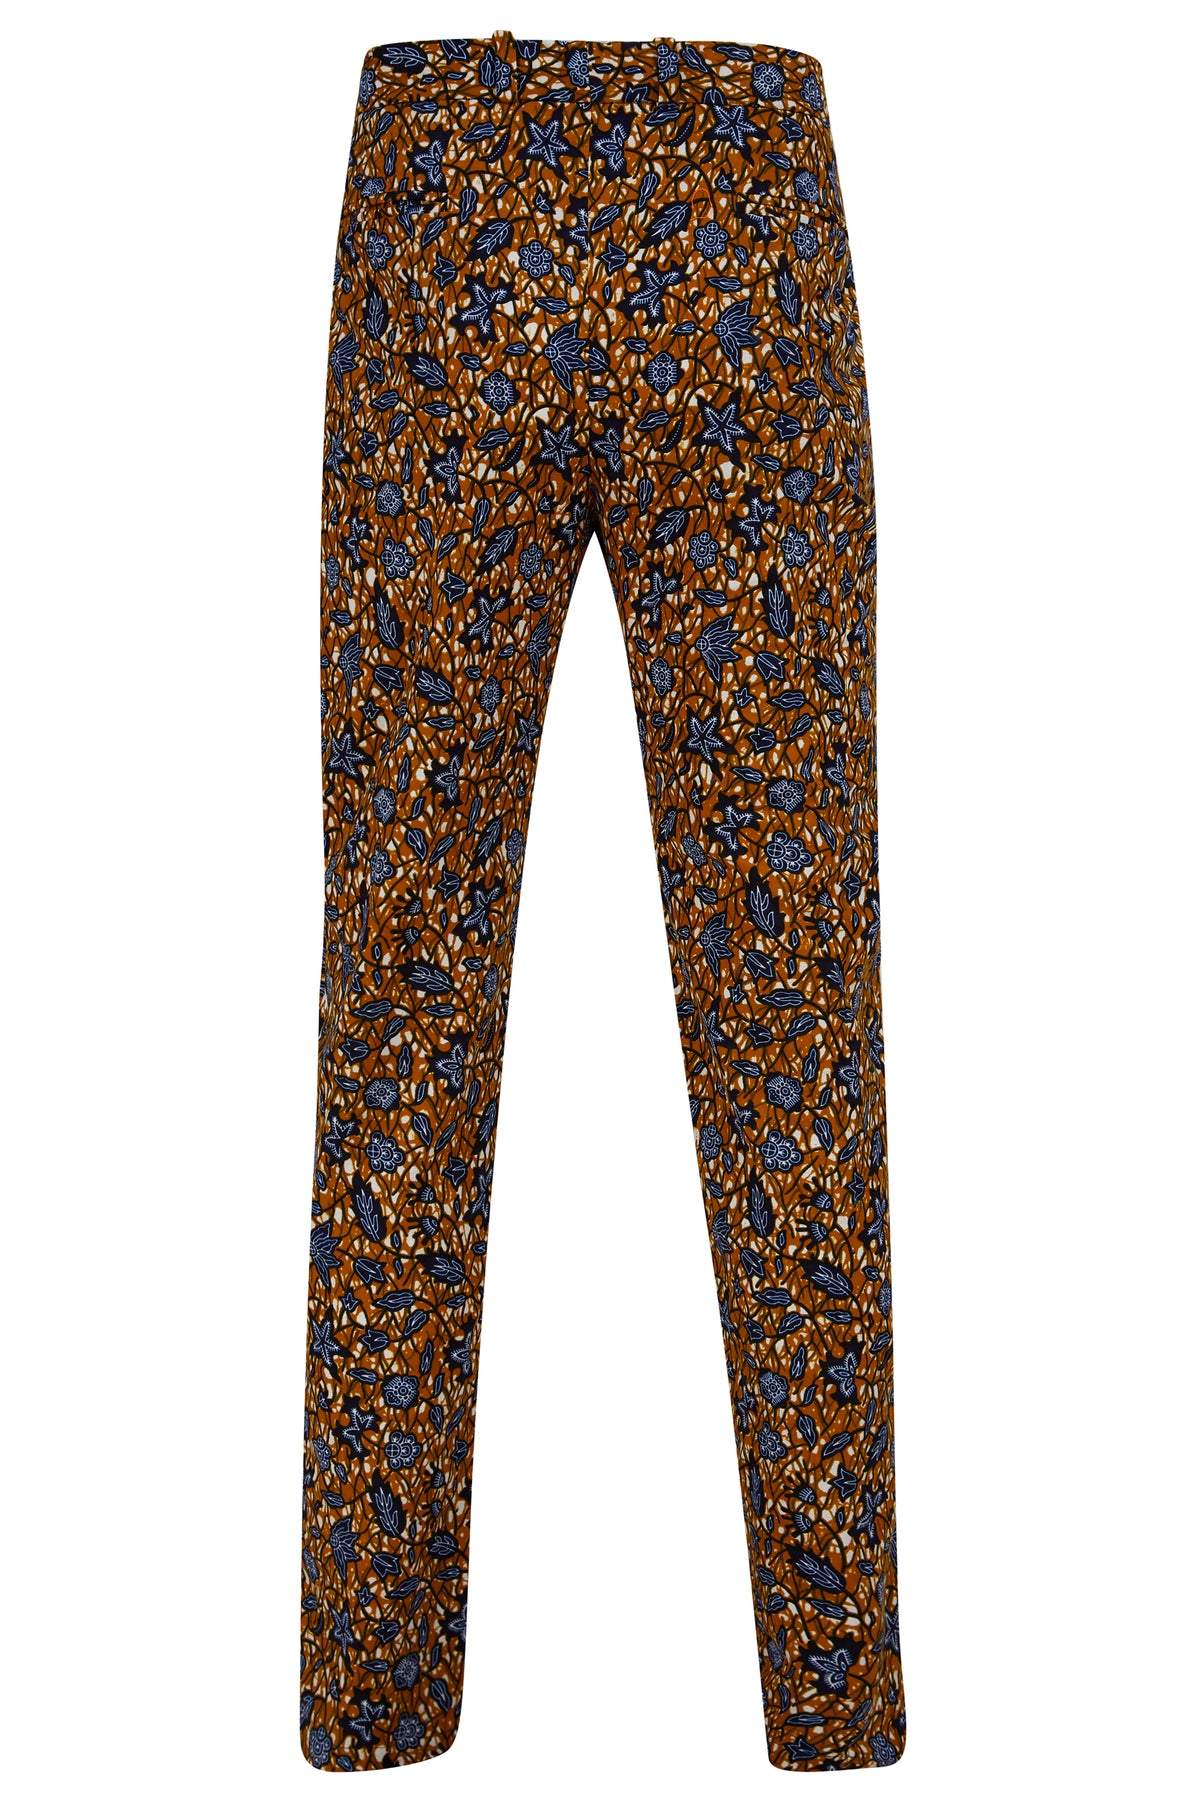 Osei straight leg trousers-Brown Floral - OHEMA OHENE AFRICAN INSPIRED FASHION